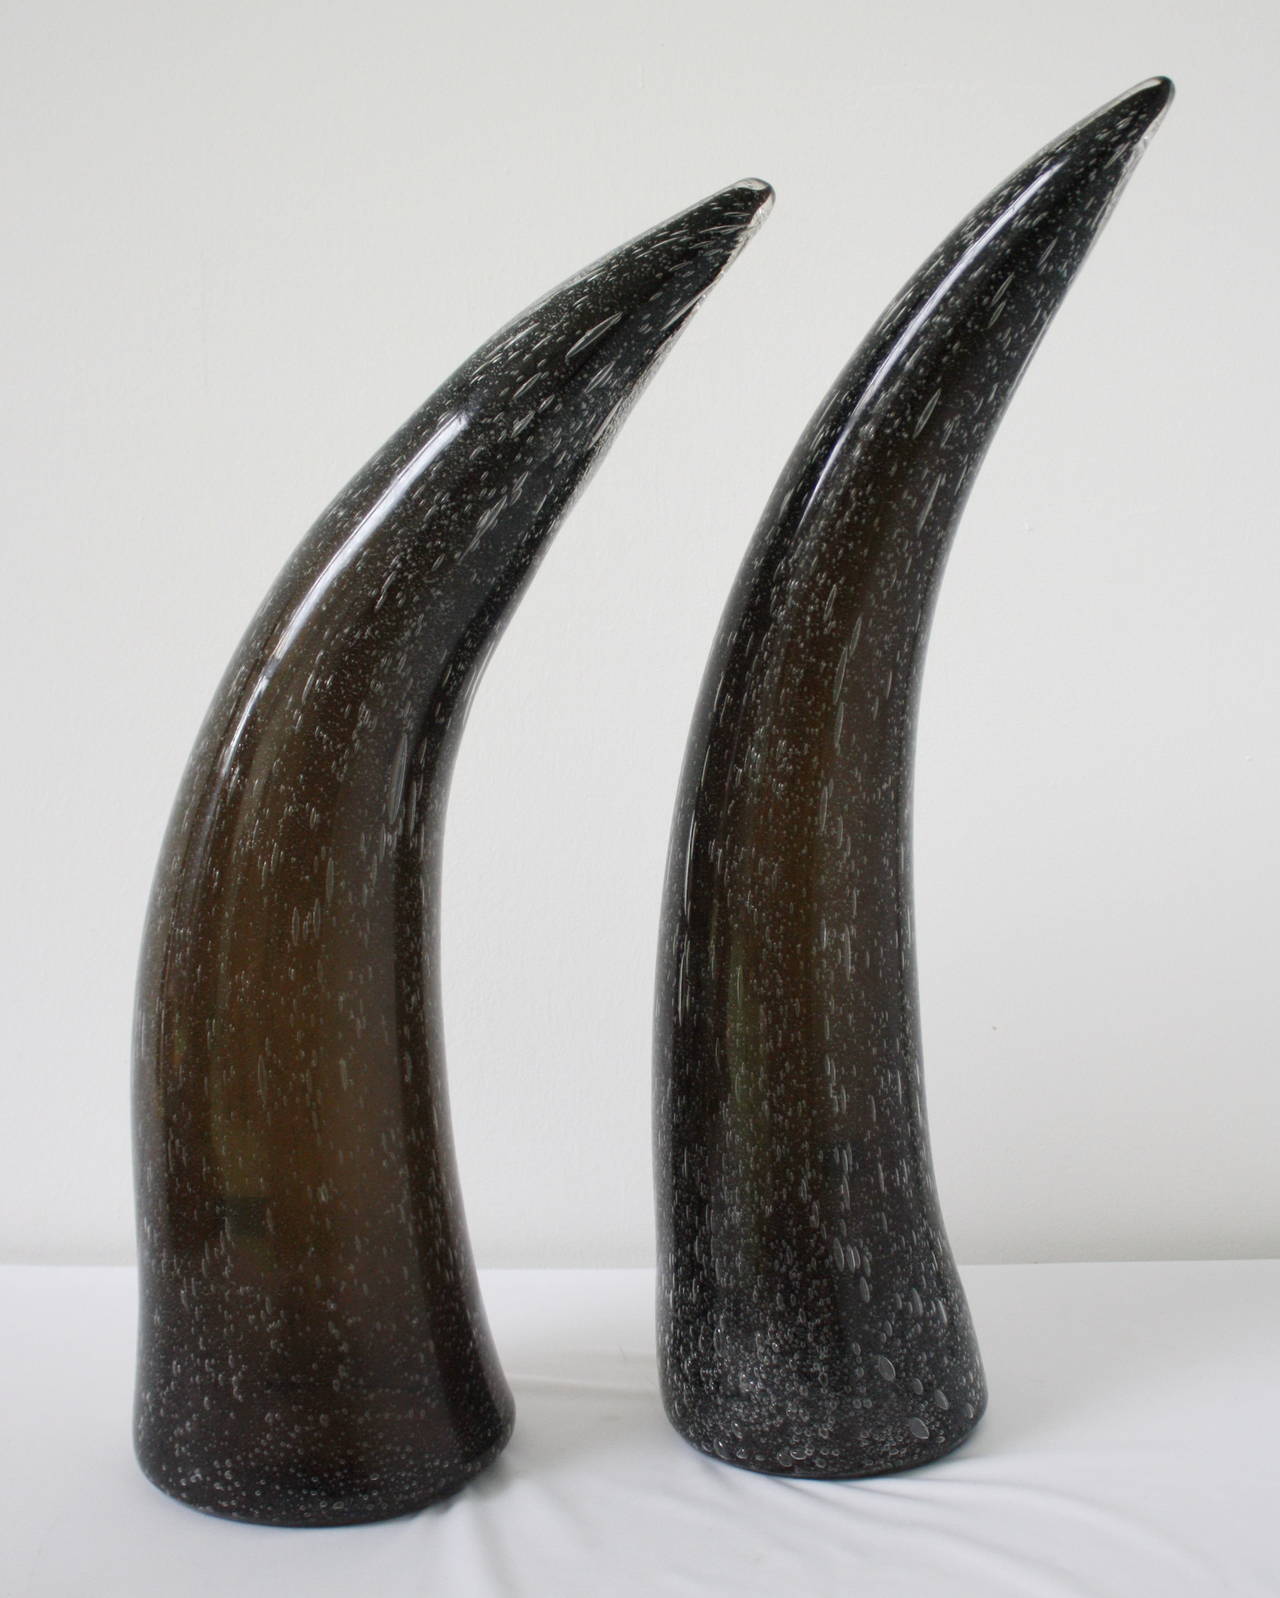 Two glass horns will come to an interesting and decorative glass sculpture by Romano Donà, Murano, Italy.